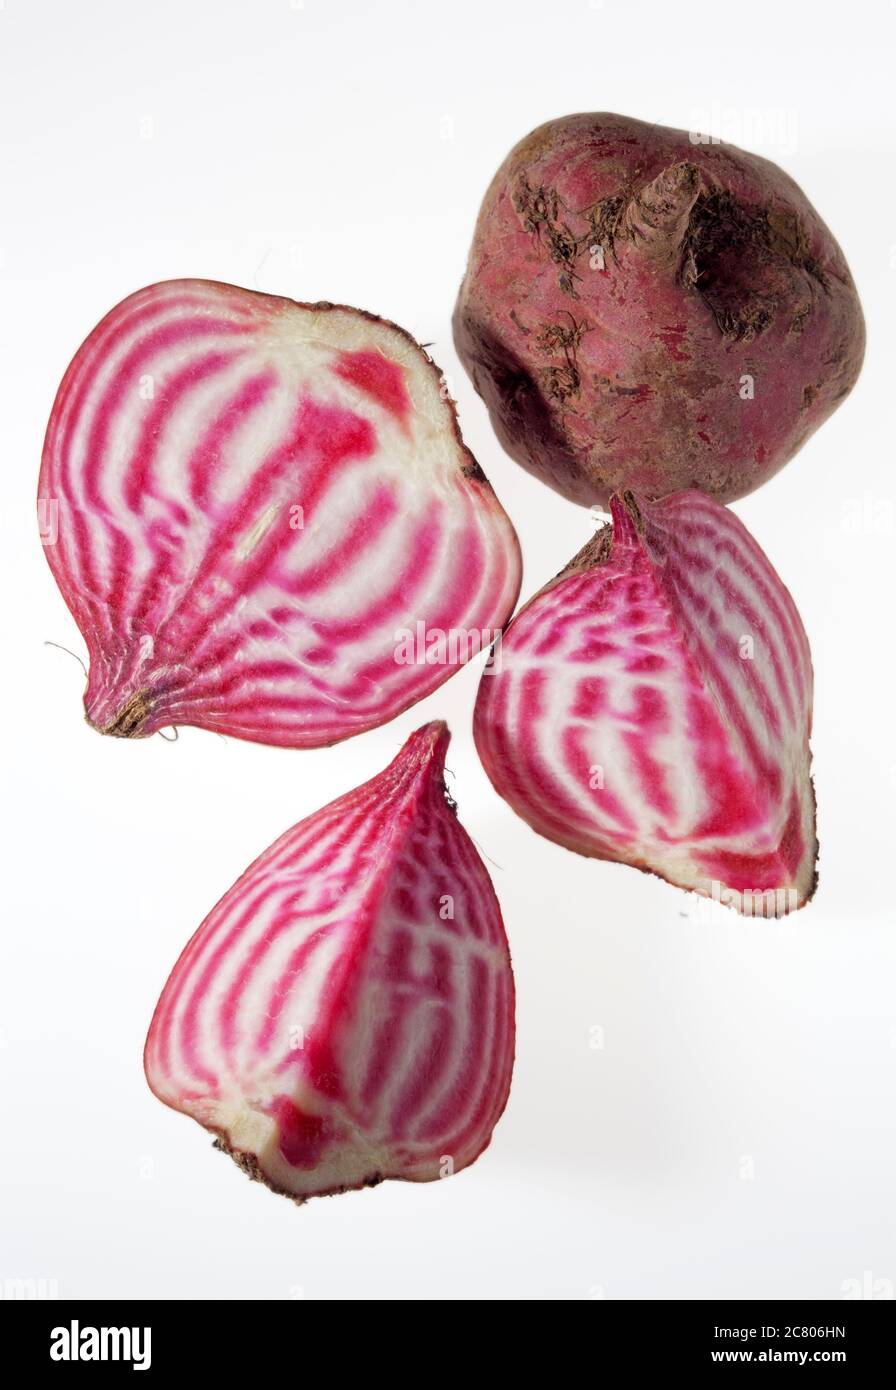 A freshly cut open Chioggia, or Candy Striped beetroot on a white light box background Stock Photo